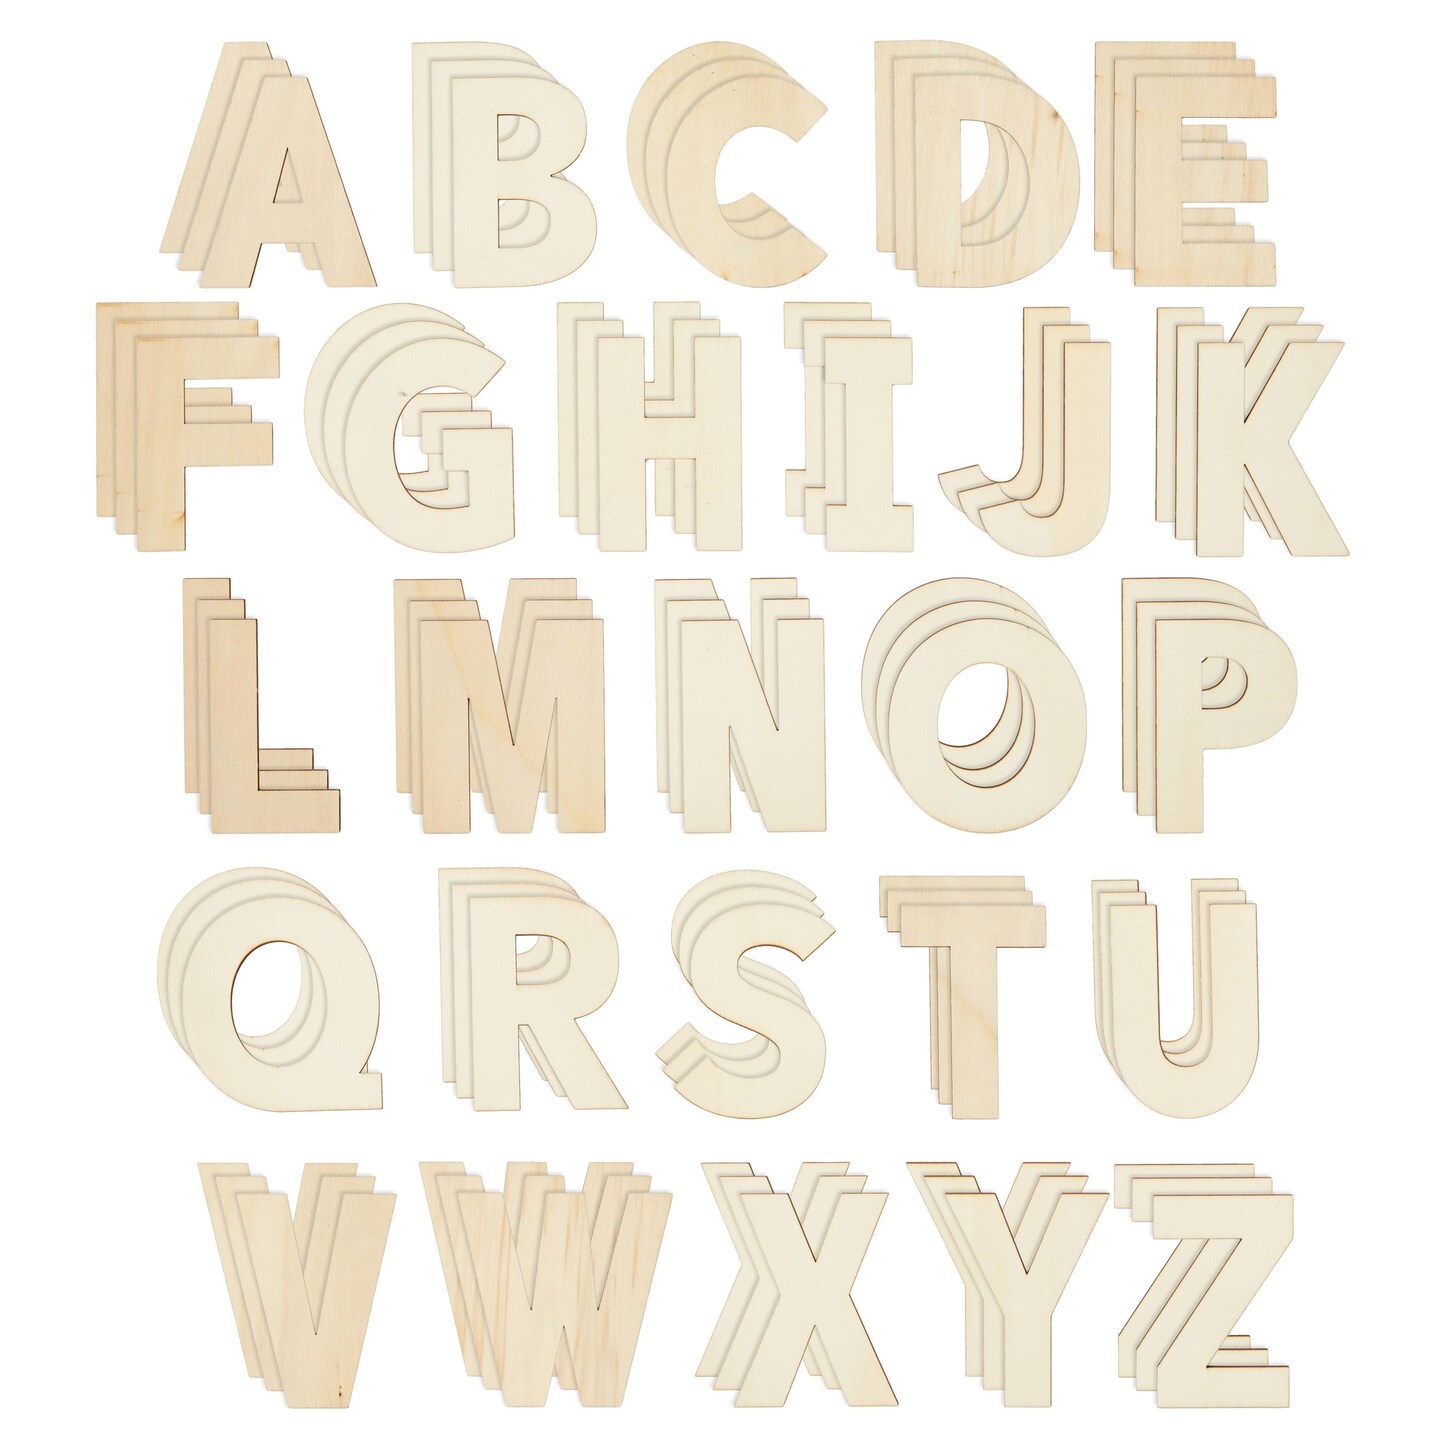  3 Wooden Letters - 78 Pcs Wood Alphabet Letters for Crafts Wood  Letters Sign Decoration Unfinished Wood Letters for Letter Board/Wall  Decor/DIY/Painted/Educational : Toys & Games